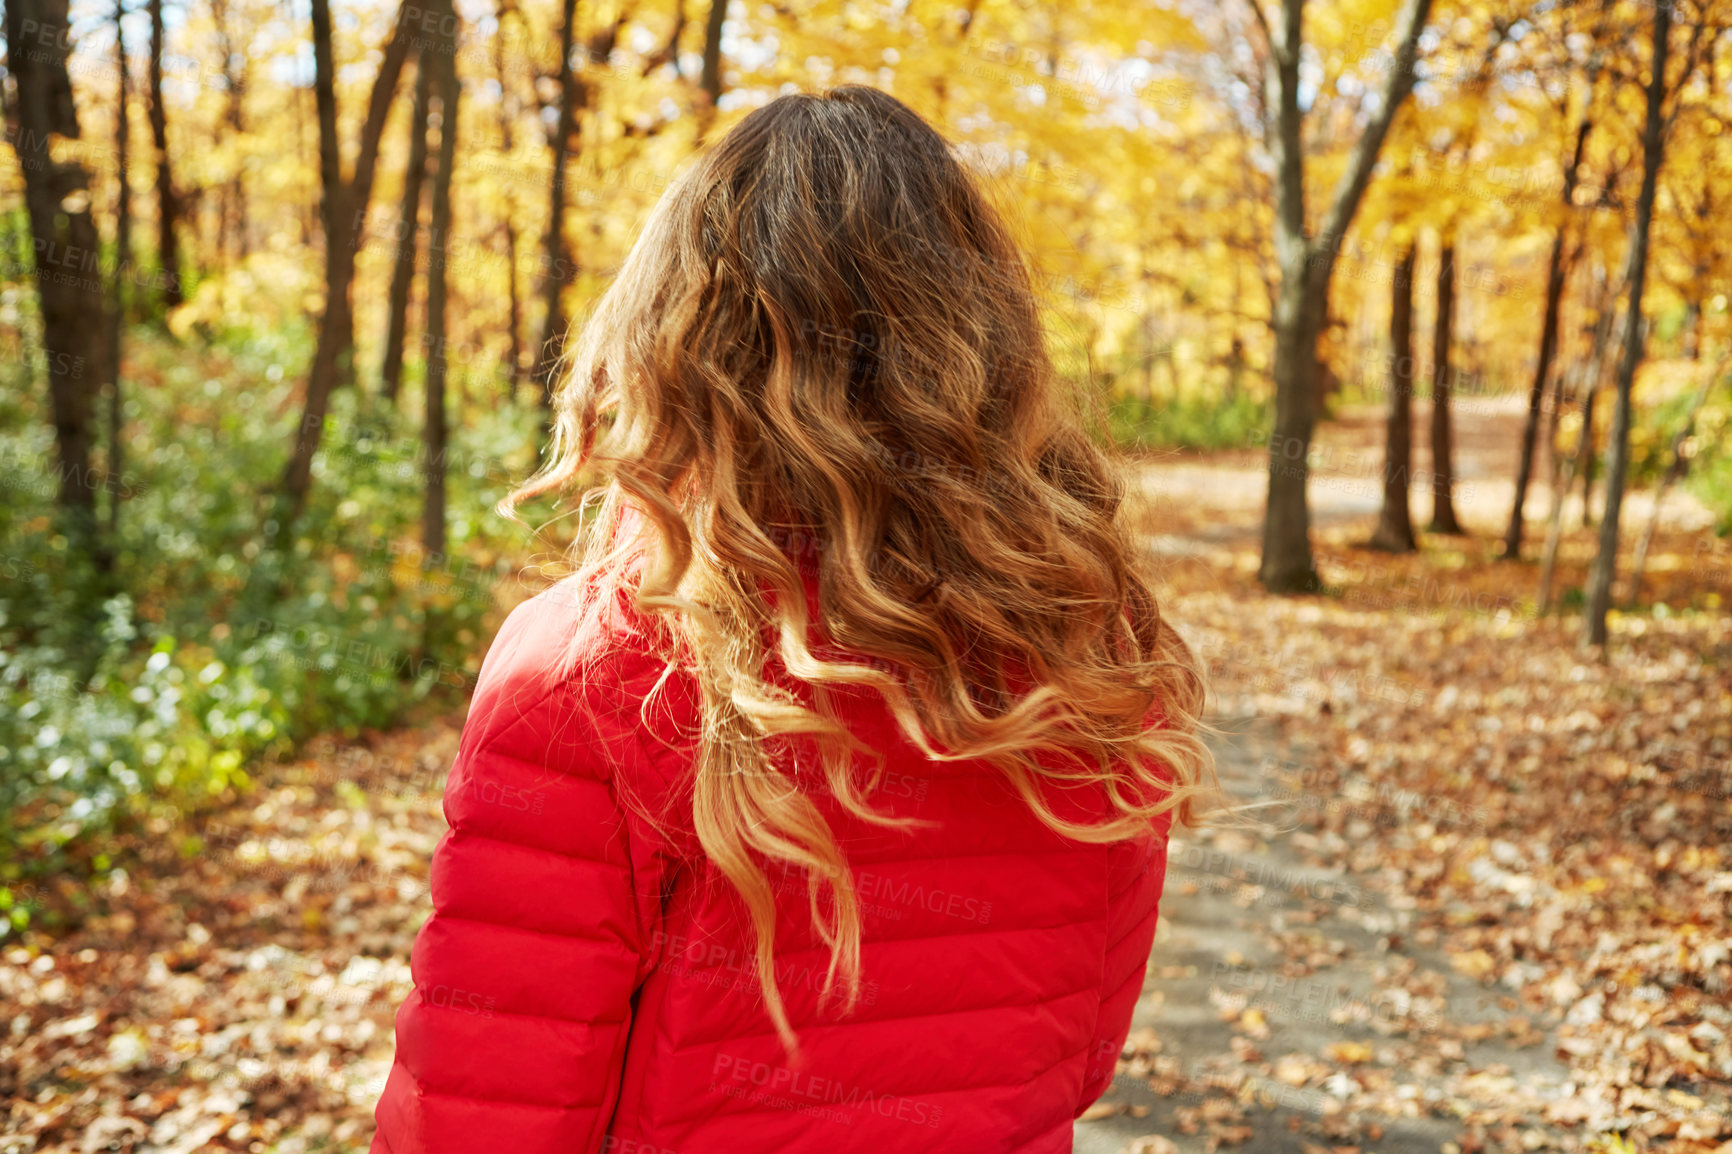 Buy stock photo Rearview shot of an unrecognizable young woman in the forest during autumn